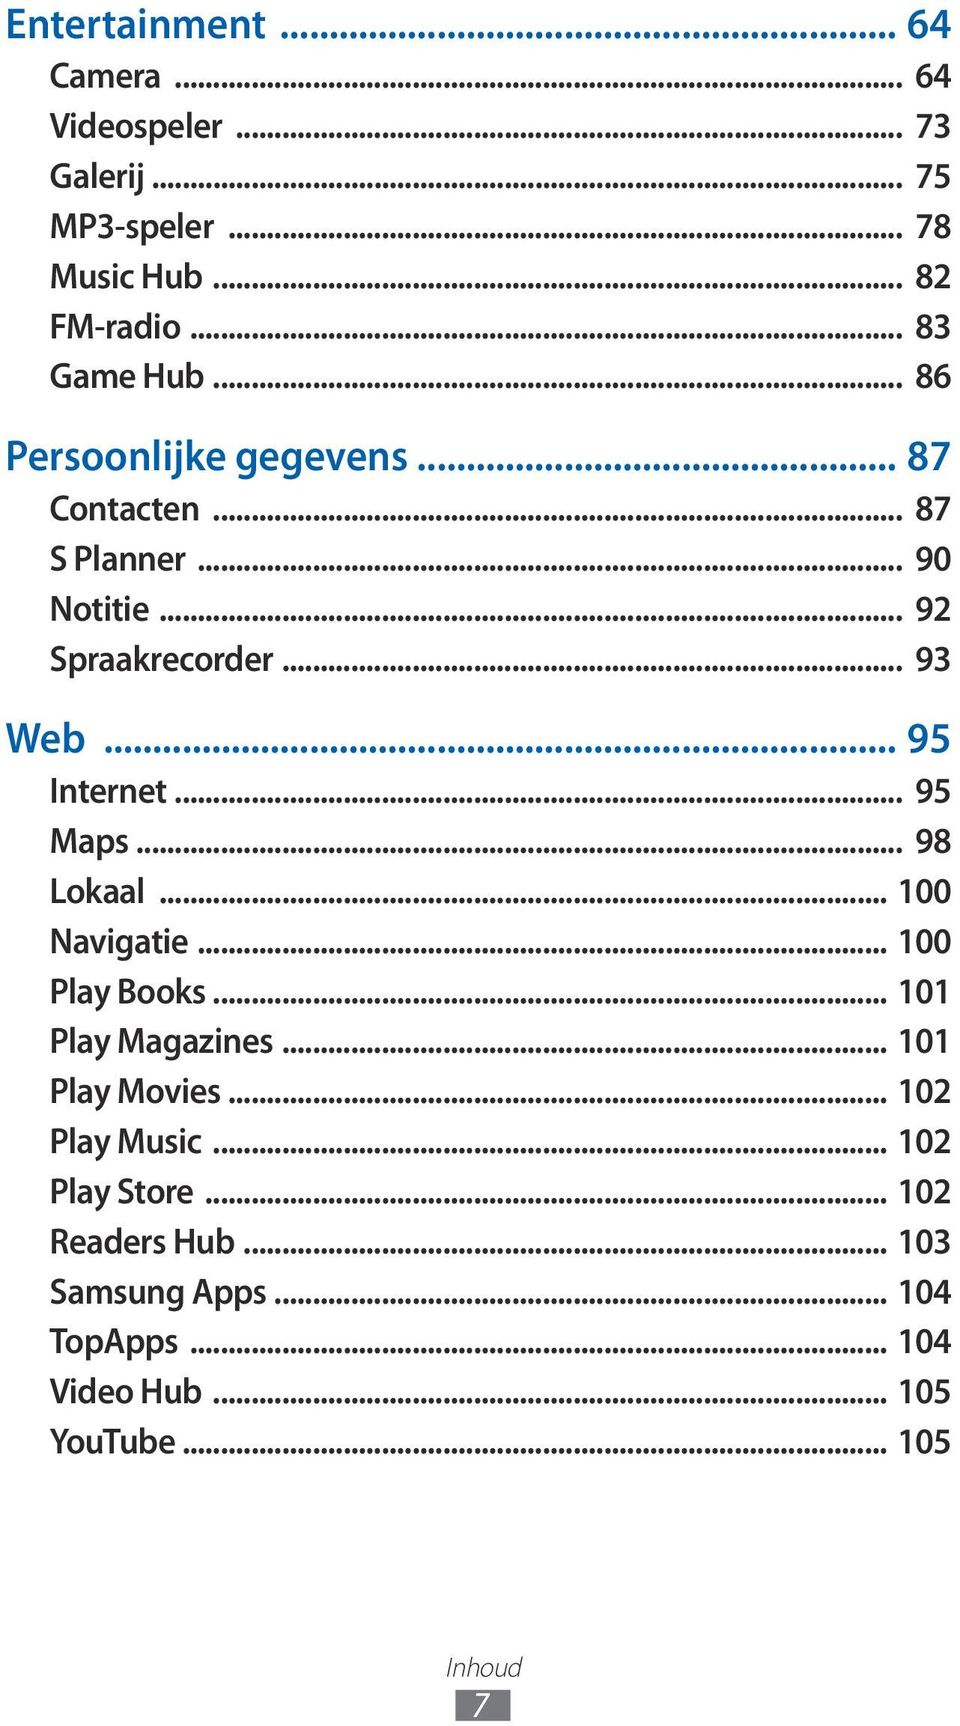 .. 95 Maps... 98 Lokaal... 100 Navigatie... 100 Play Books... 101 Play Magazines... 101 Play Movies... 102 Play Music.